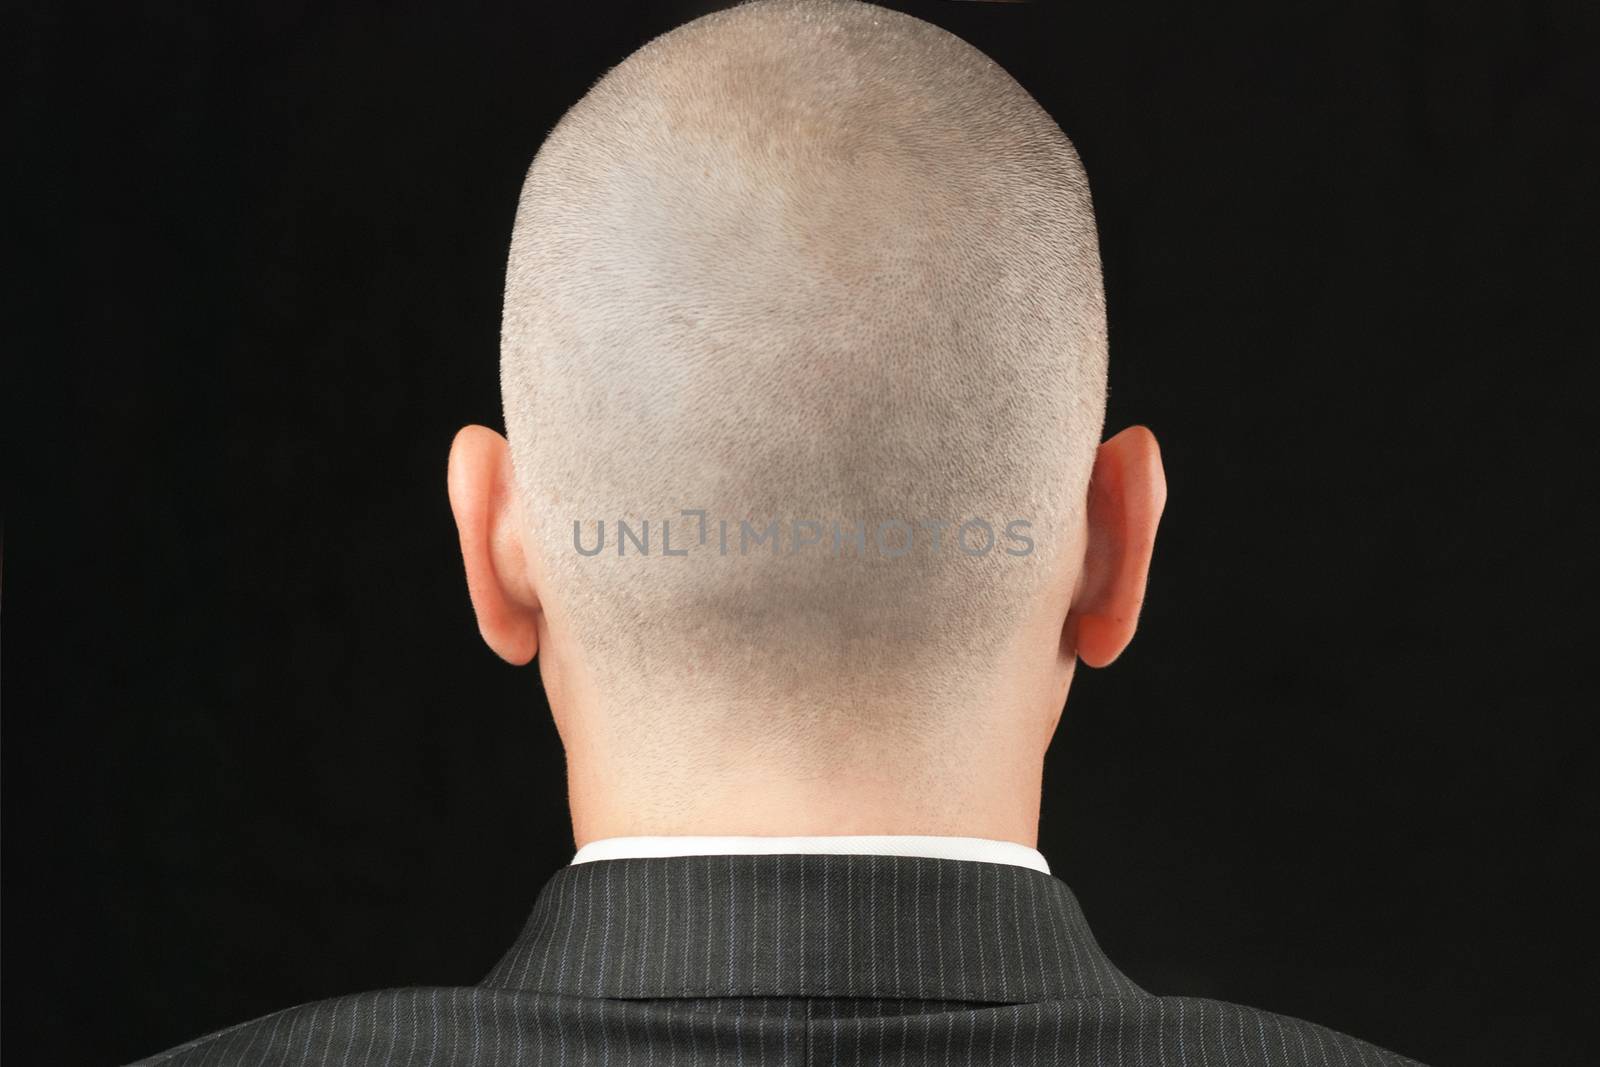 Bald Man in Suit From Behind by jackethead